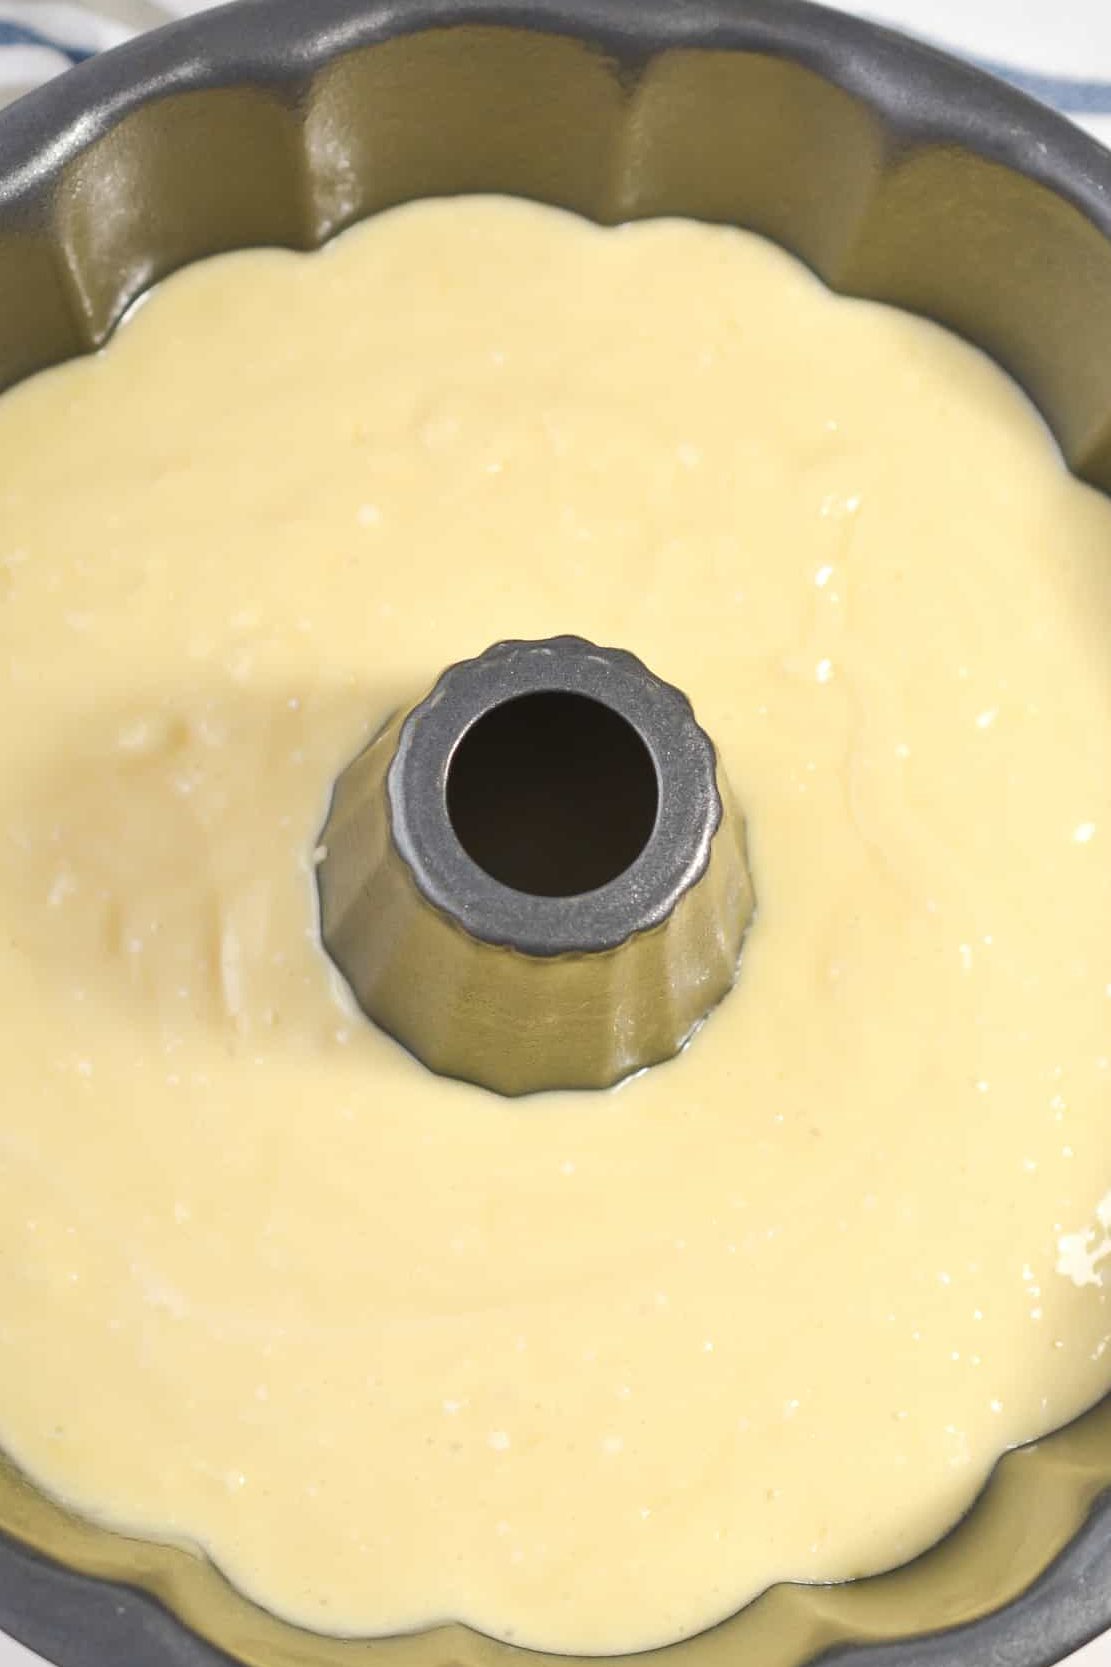 Pour the batter into a well-greased bundt pan.